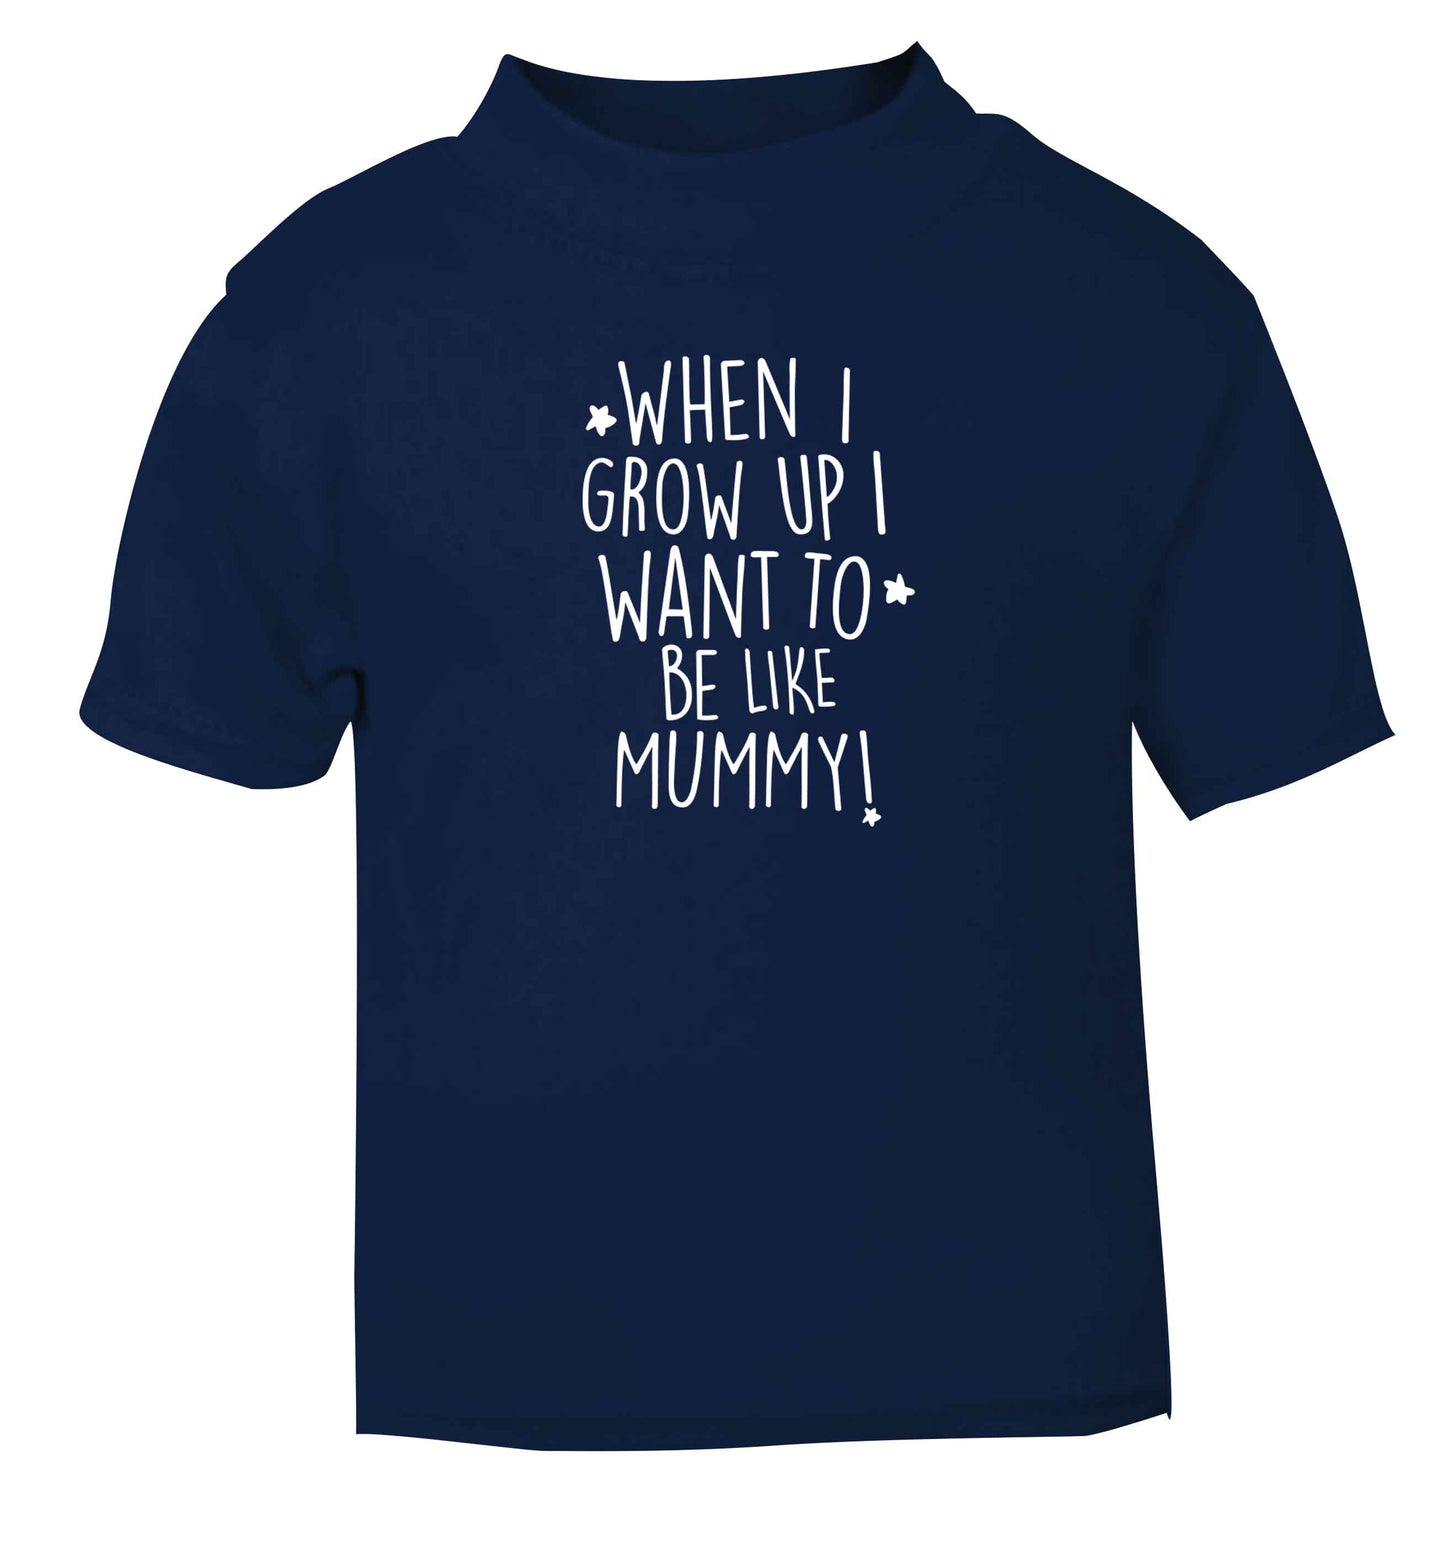 When I grow up I want to be like my mummy navy baby toddler Tshirt 2 Years